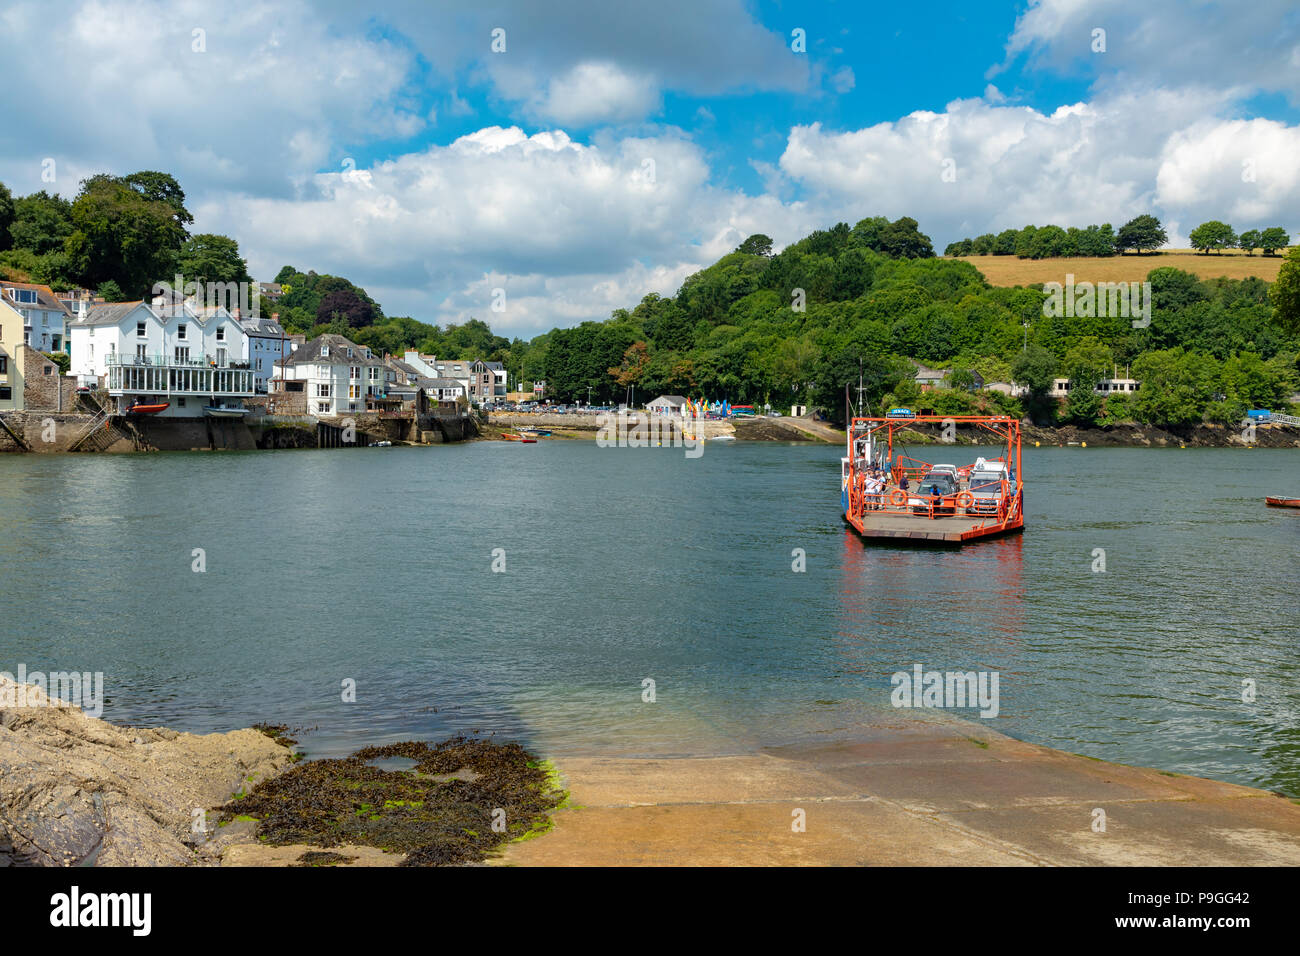 Fowey Cornwall England July 14, 2018 View across the River Fowey from Bodinnick, showing the car ferry Stock Photo